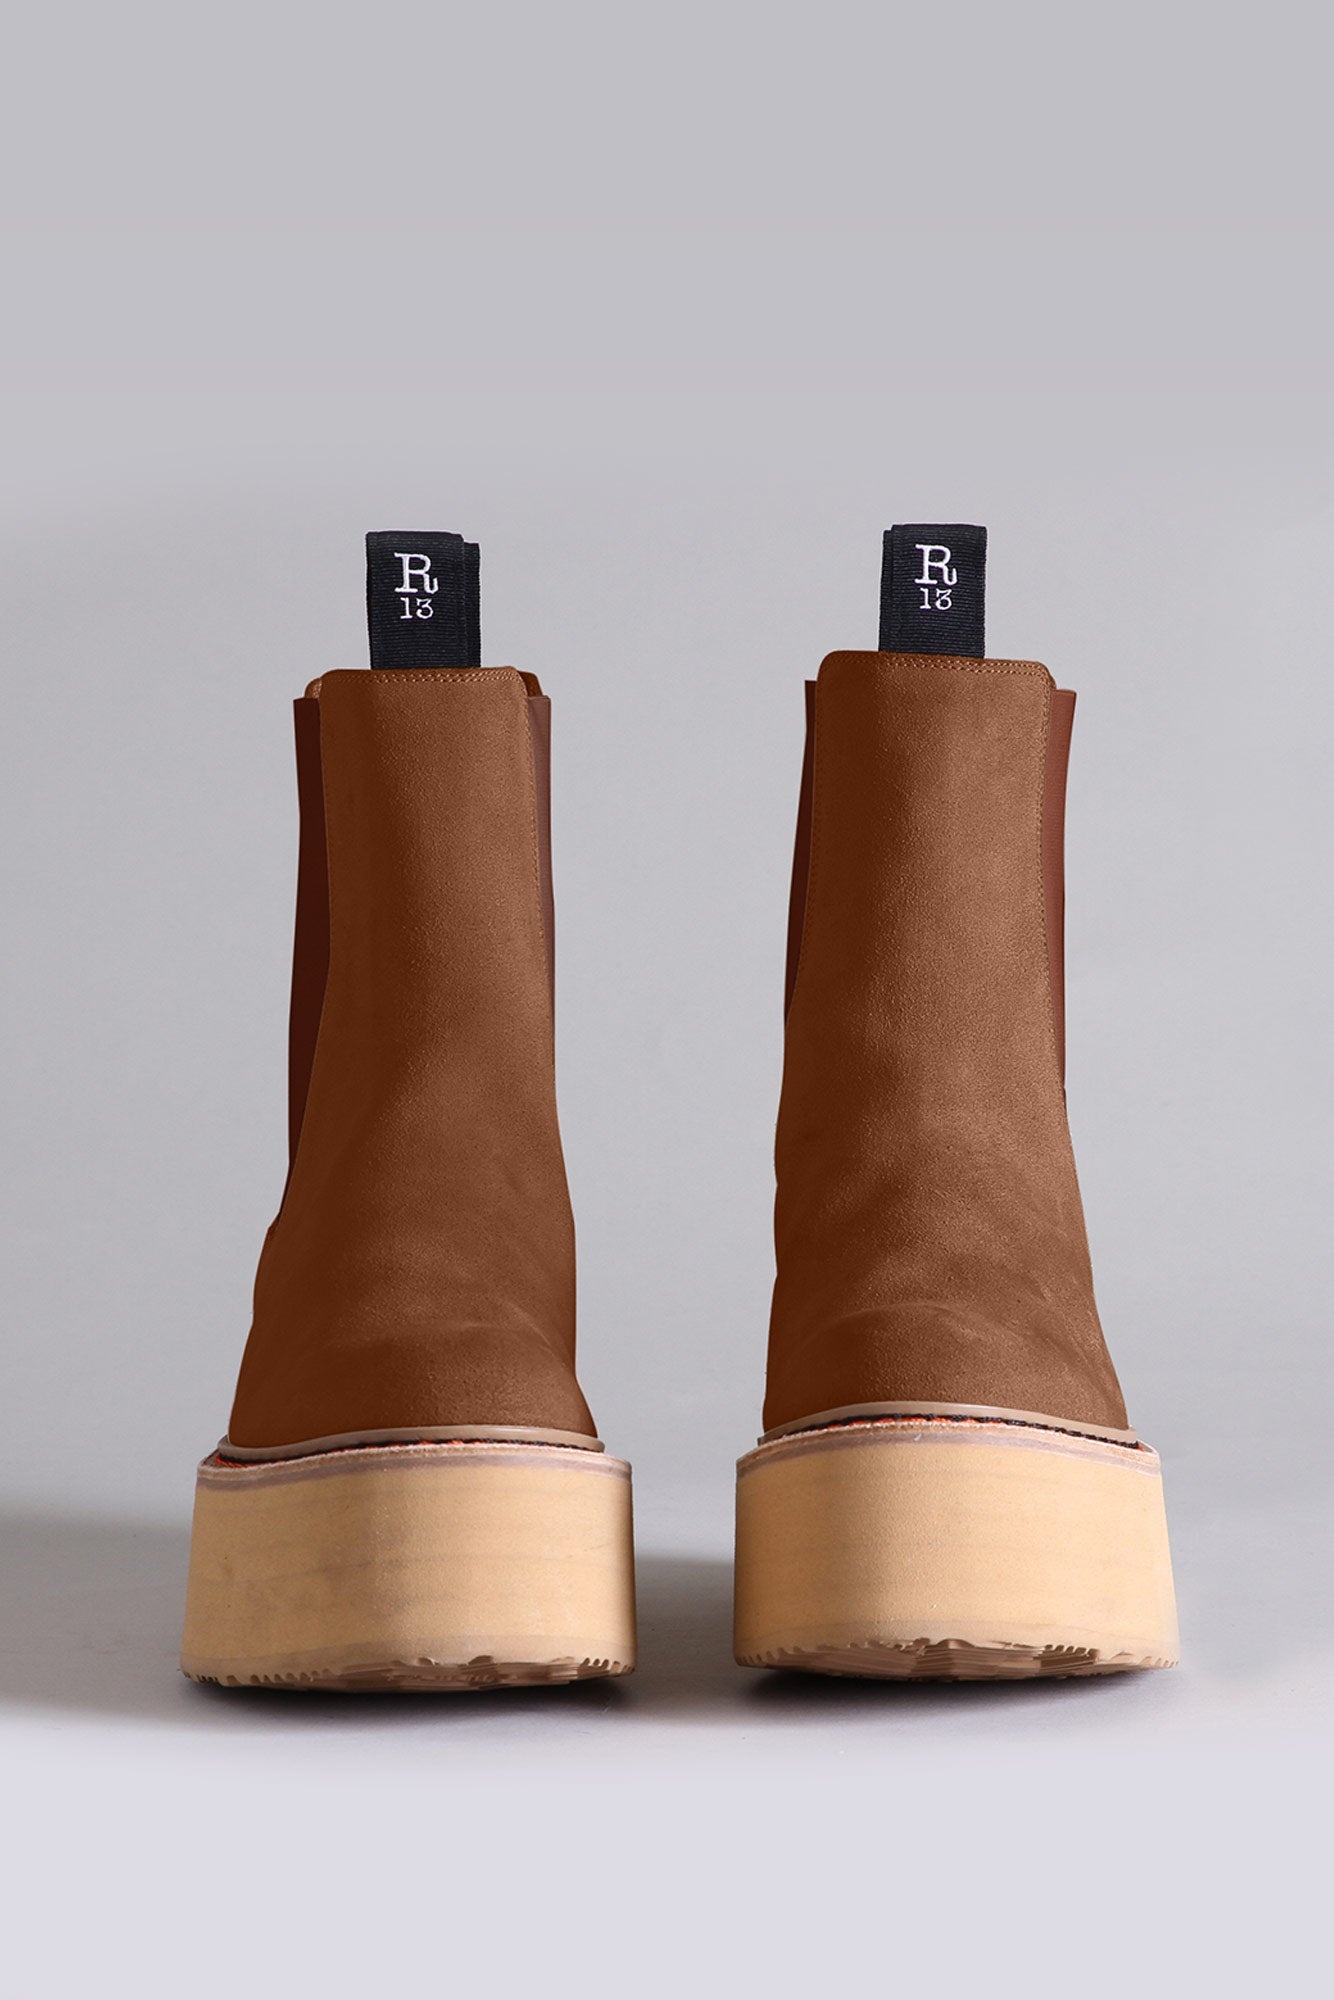 DOUBLE STACK CHELSEA BOOT - BROWN SUEDE | R13 - 2